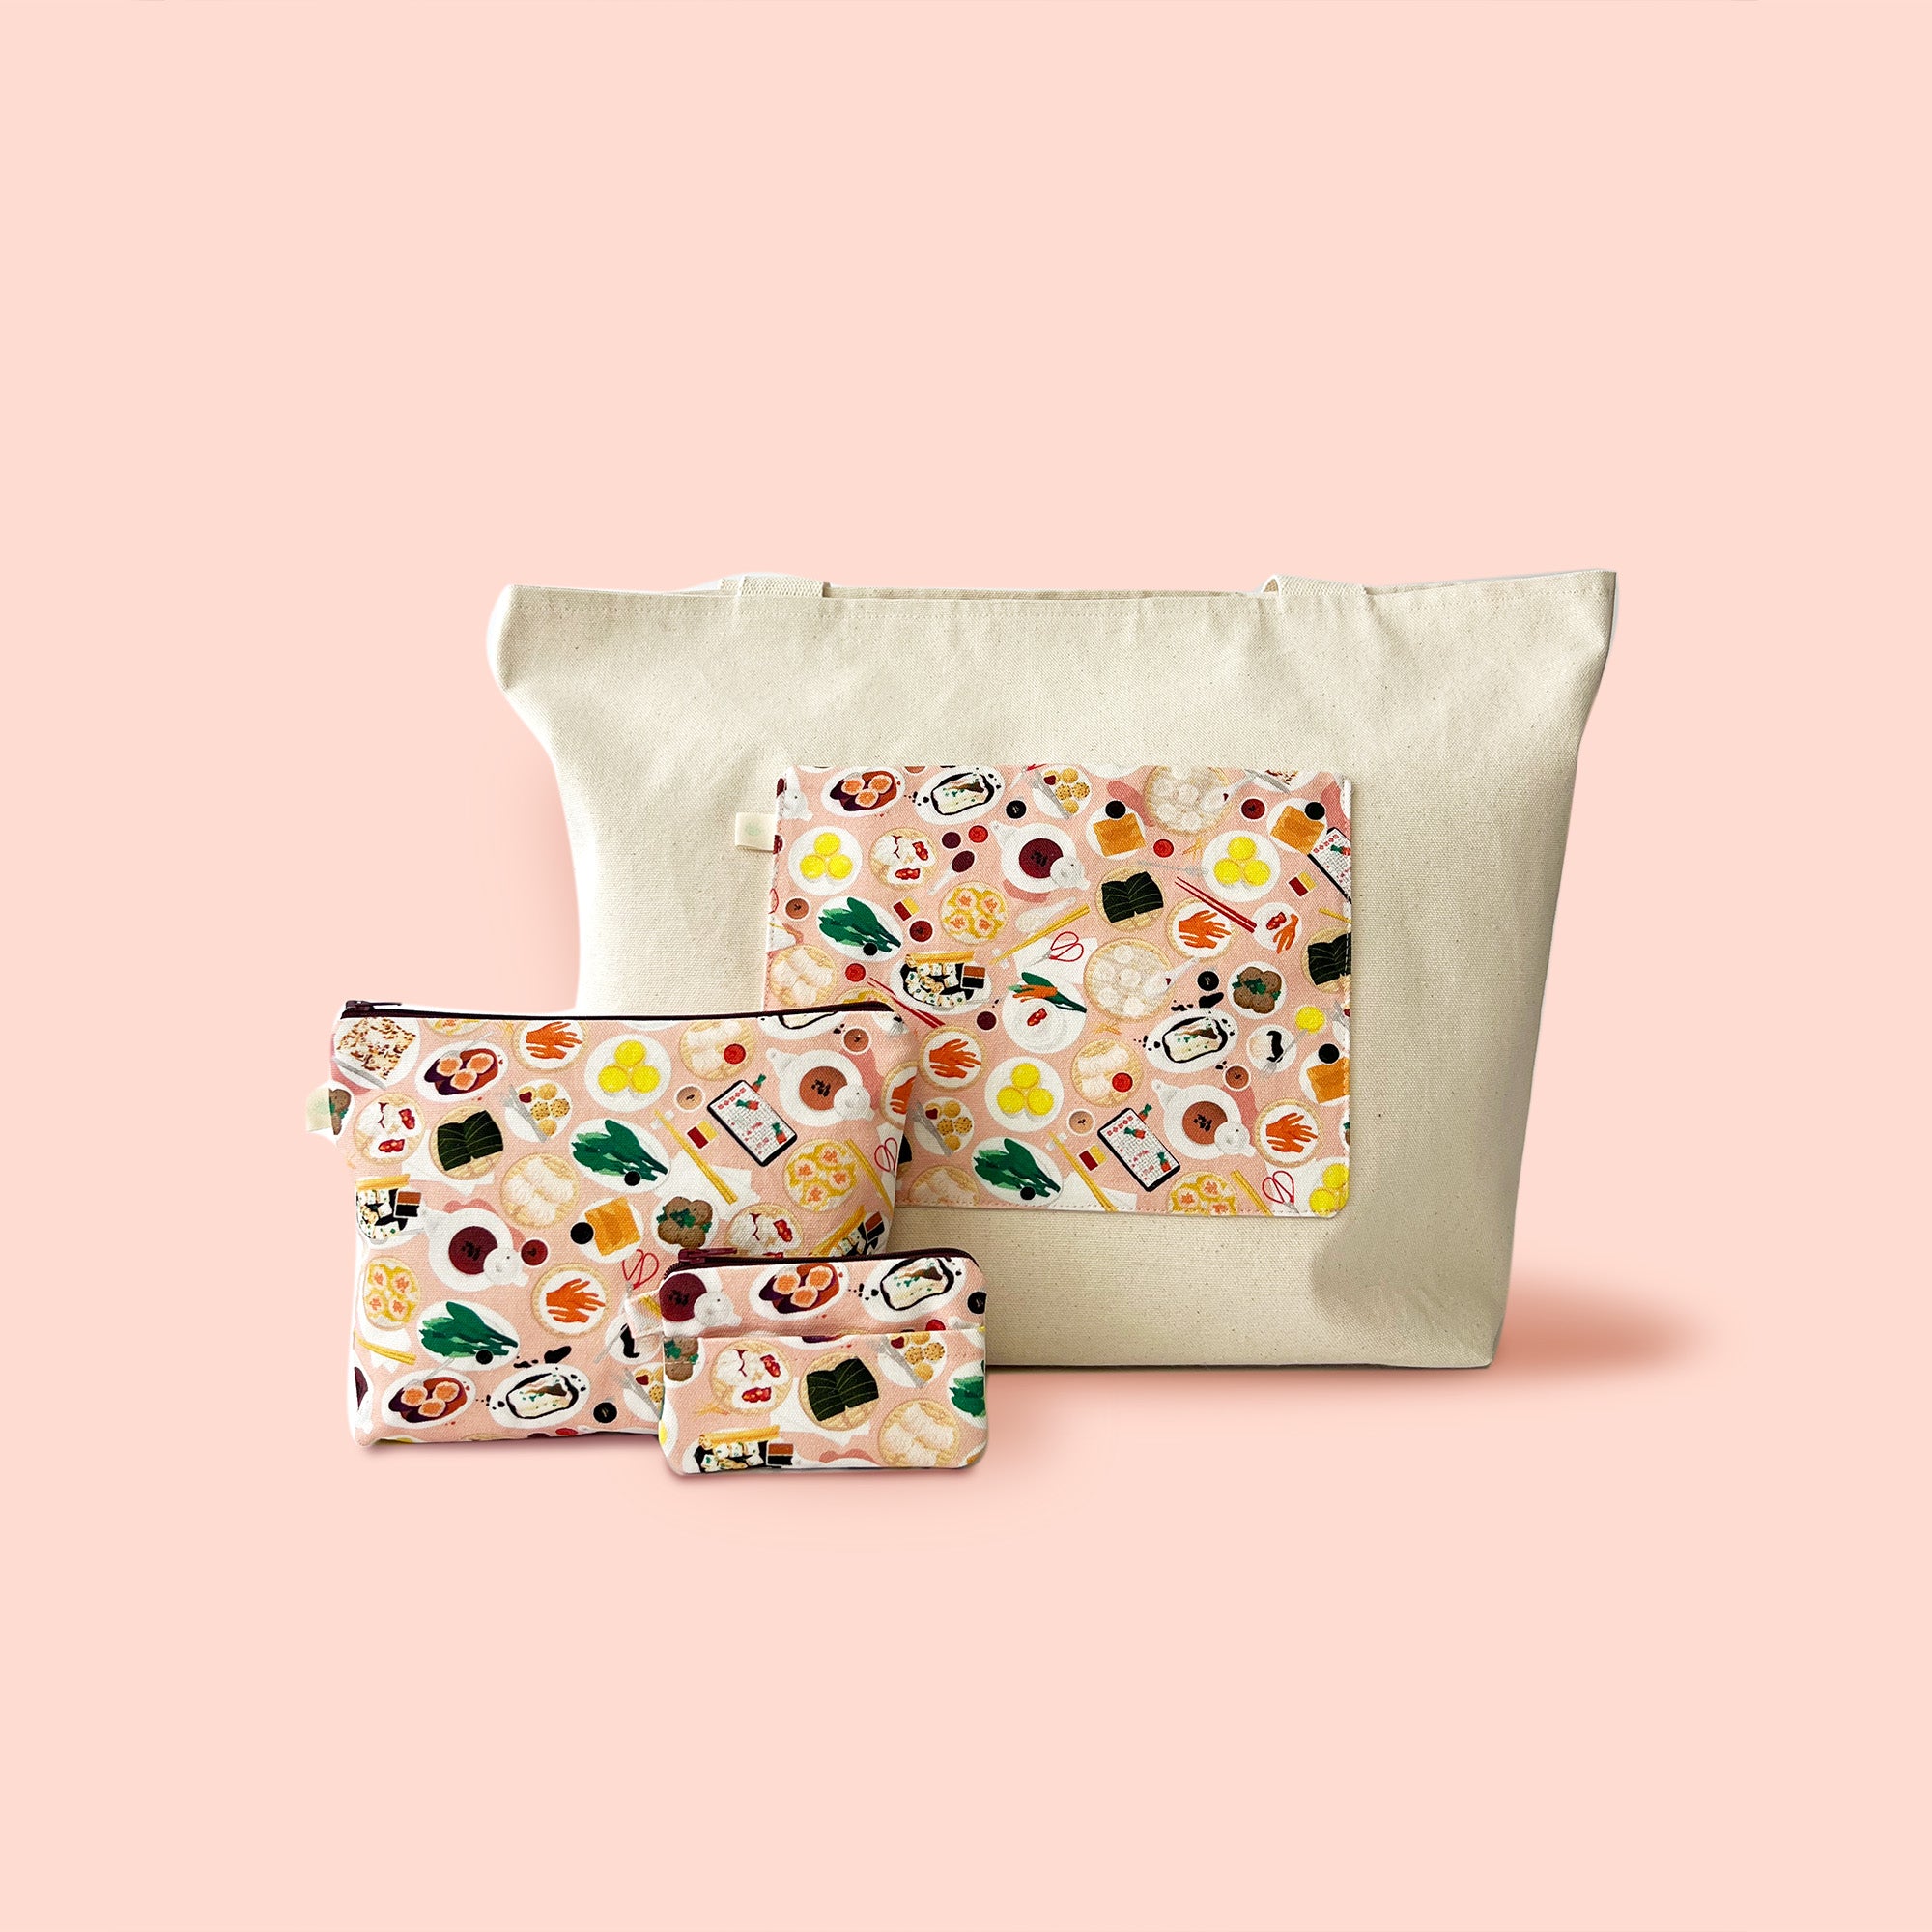 Dim sum pattern tote bag, zipper pouch and coin purse by I&